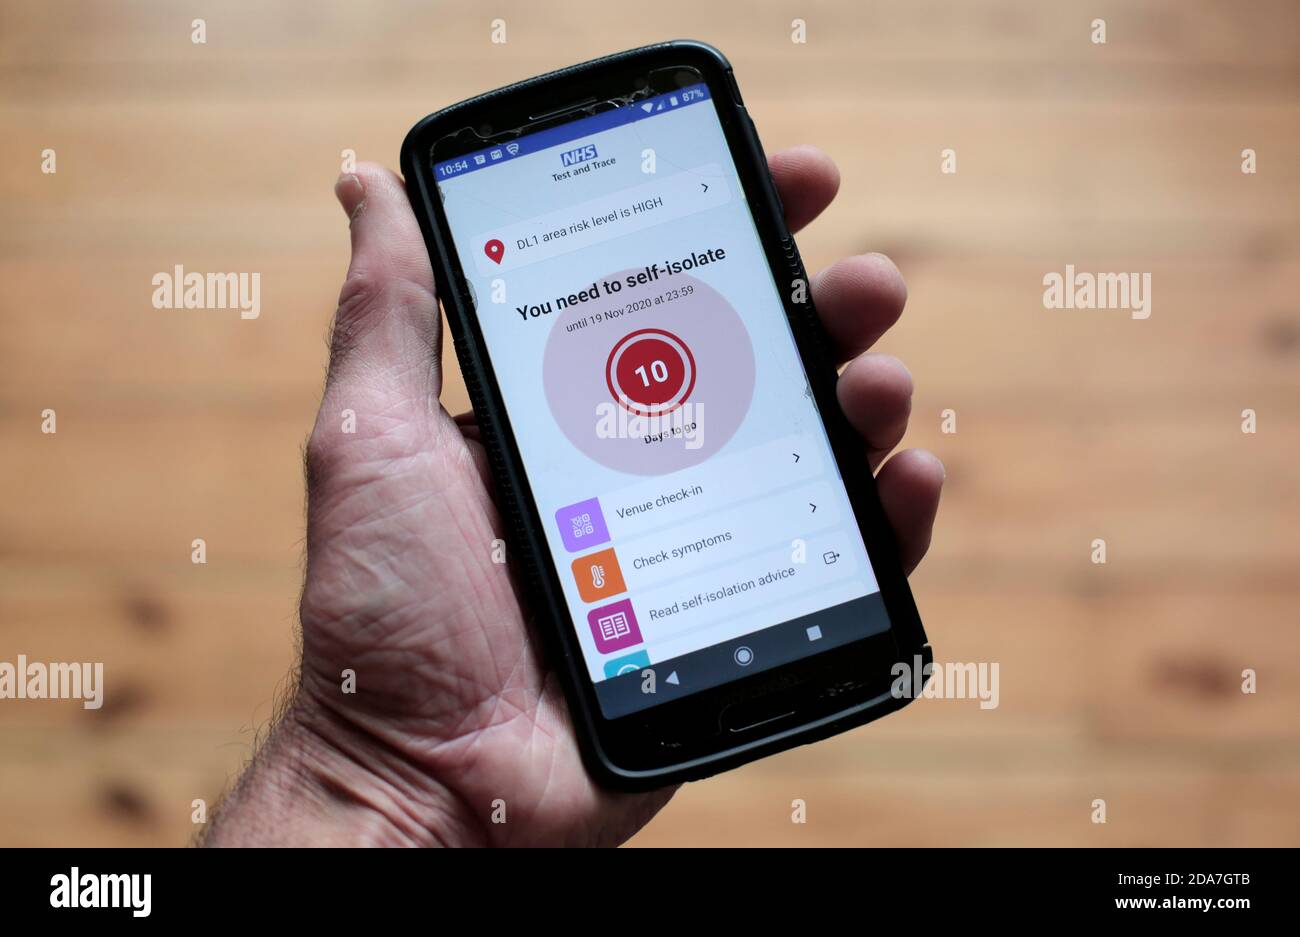 The NHS Test and Trace app flashing up a self-isolate warning on a smartphone. 10/11/2020. Photograph: Stuart Boulton. Stock Photo